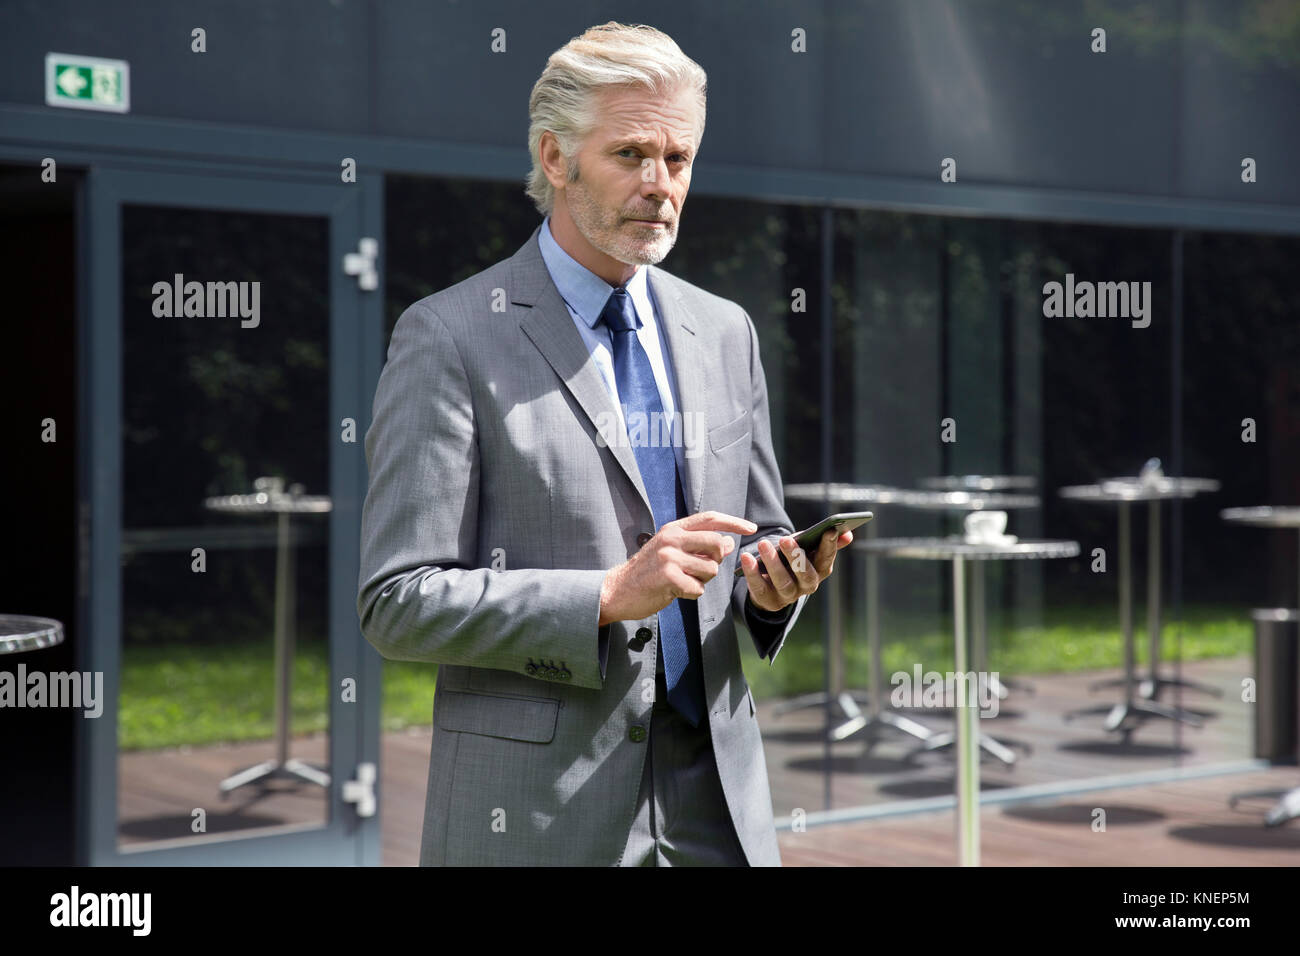 Businessman texting on smartphone Banque D'Images